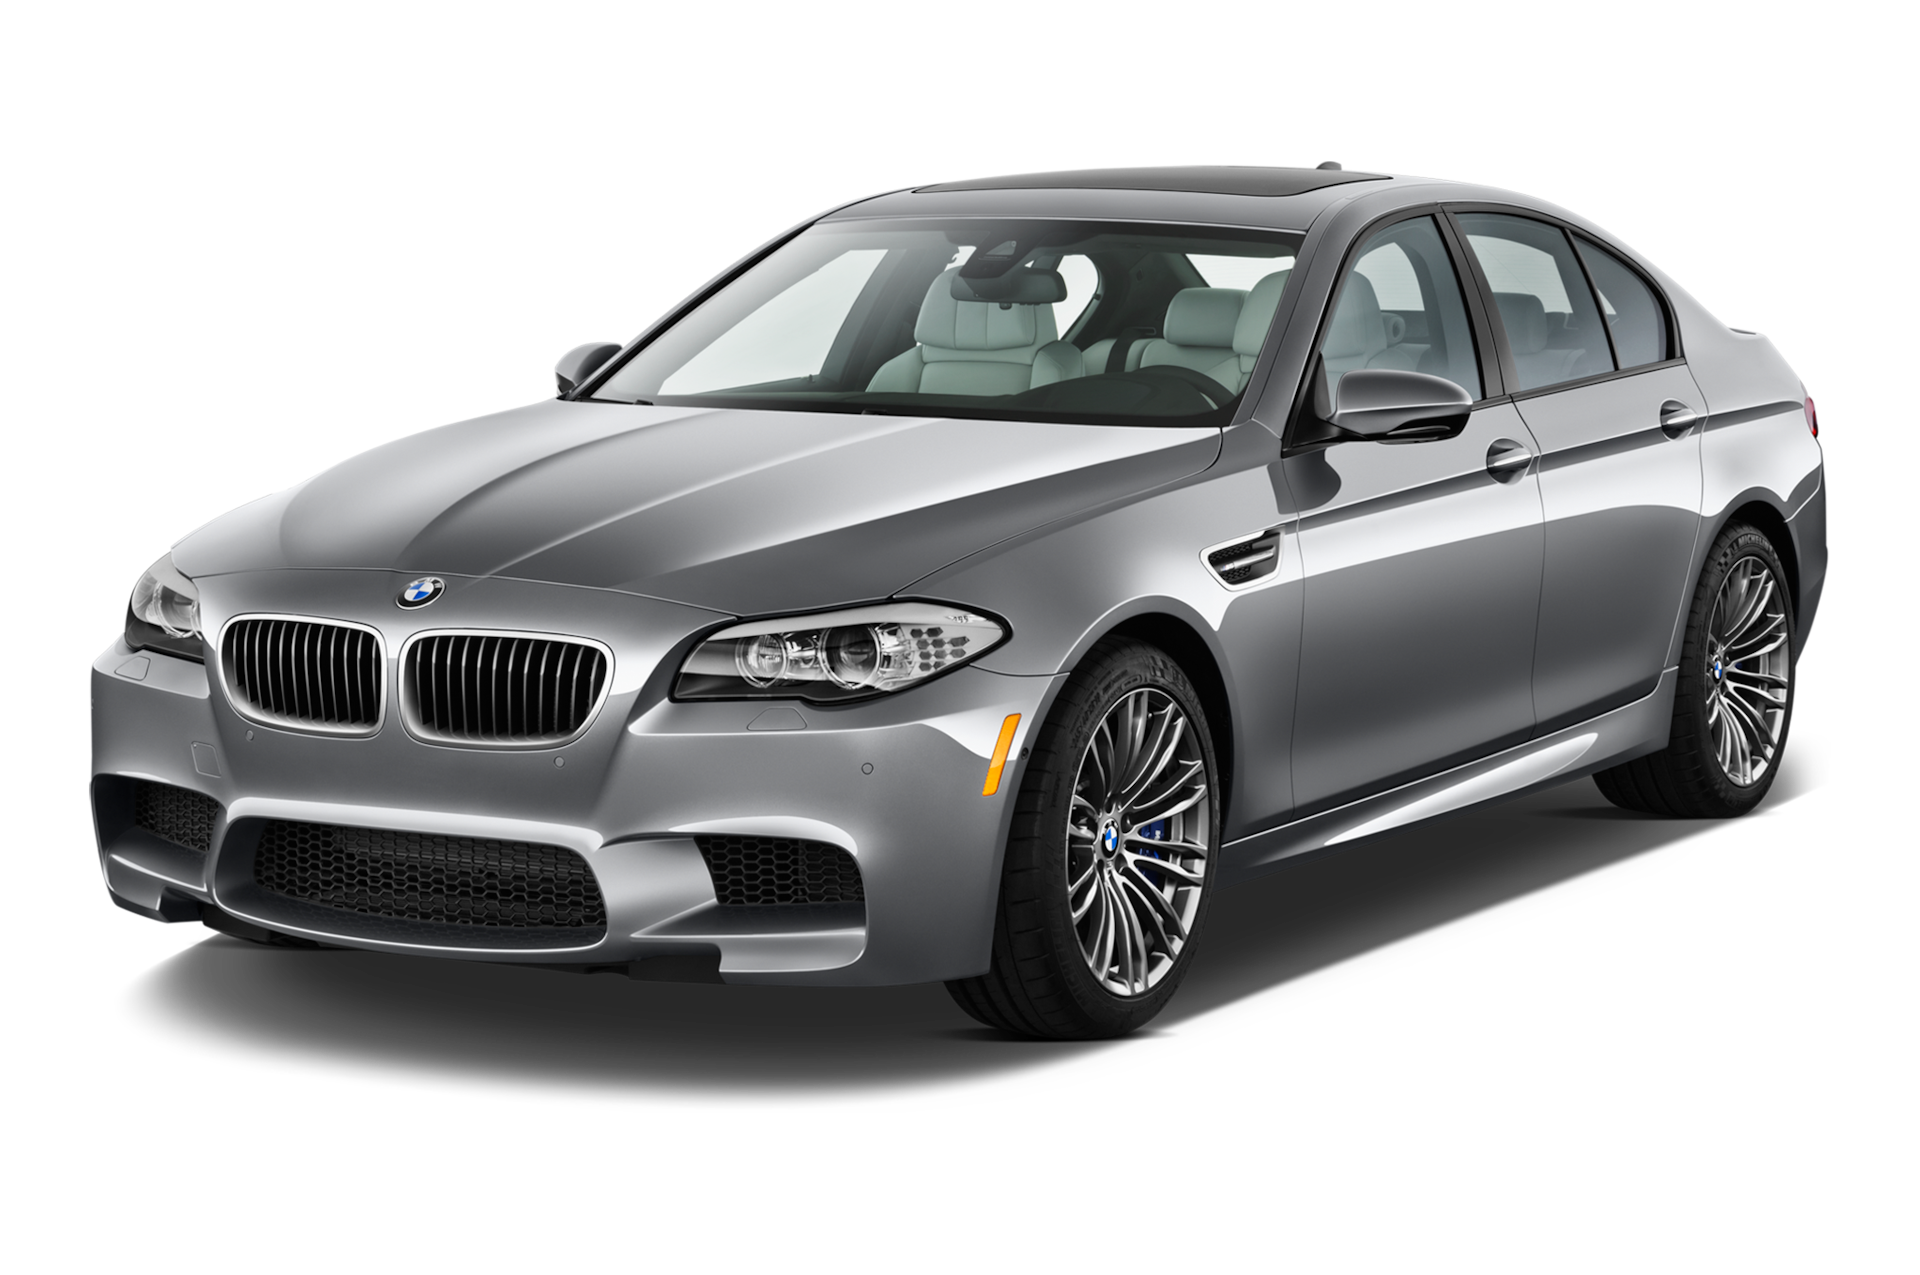 2013 BMW M5 Prices, Reviews, and Photos - MotorTrend